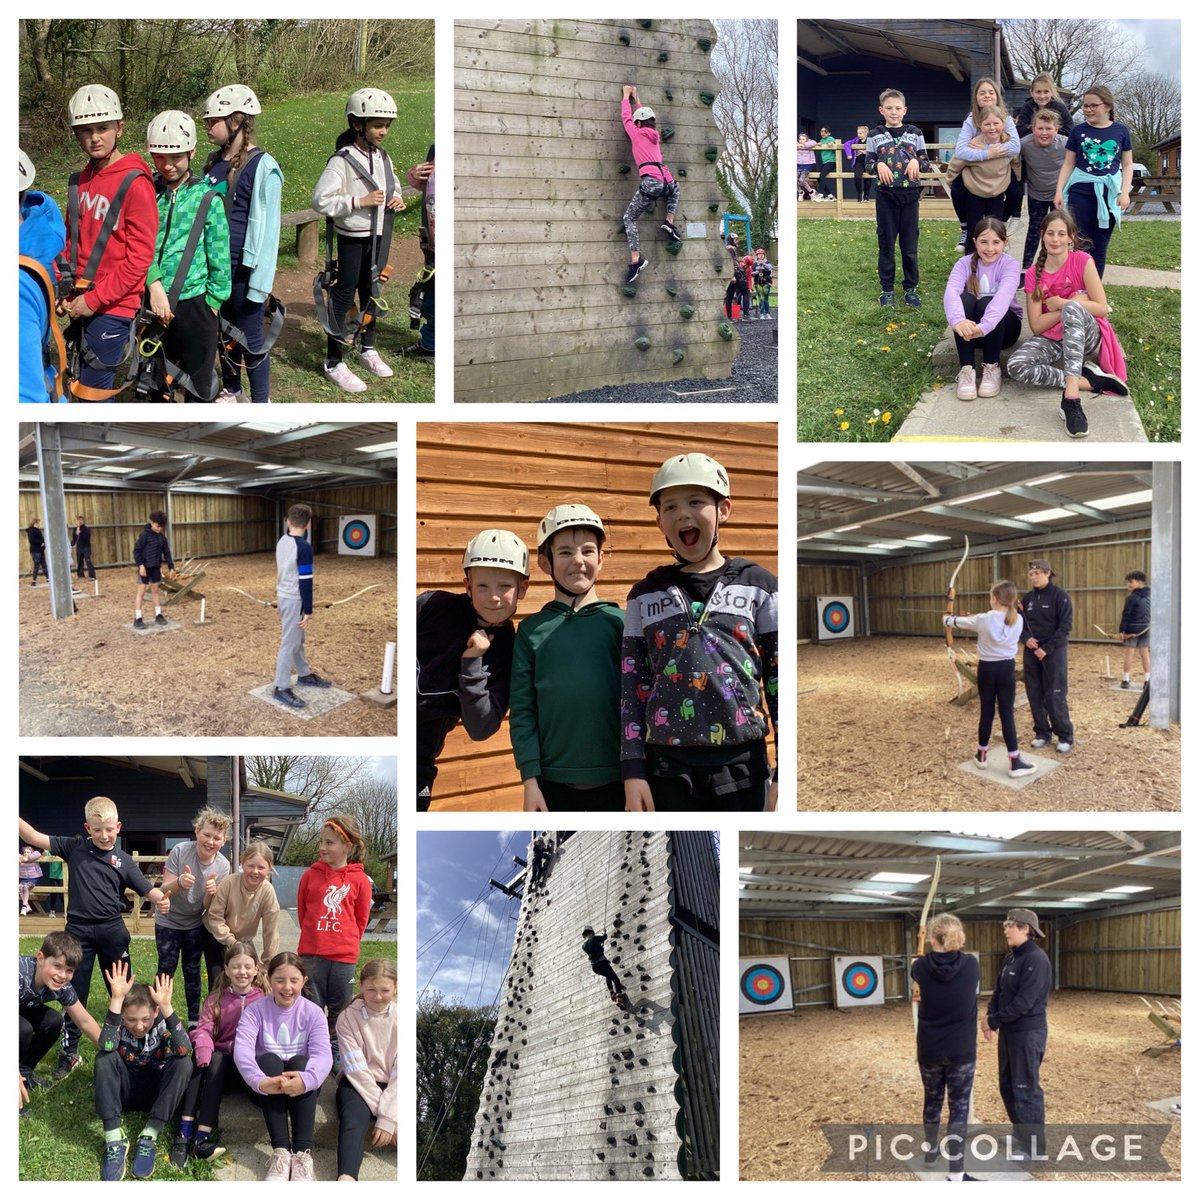 Year 5 have had a wonderful first day in Morfa Bay. #residential #outdooractivities #morfabay